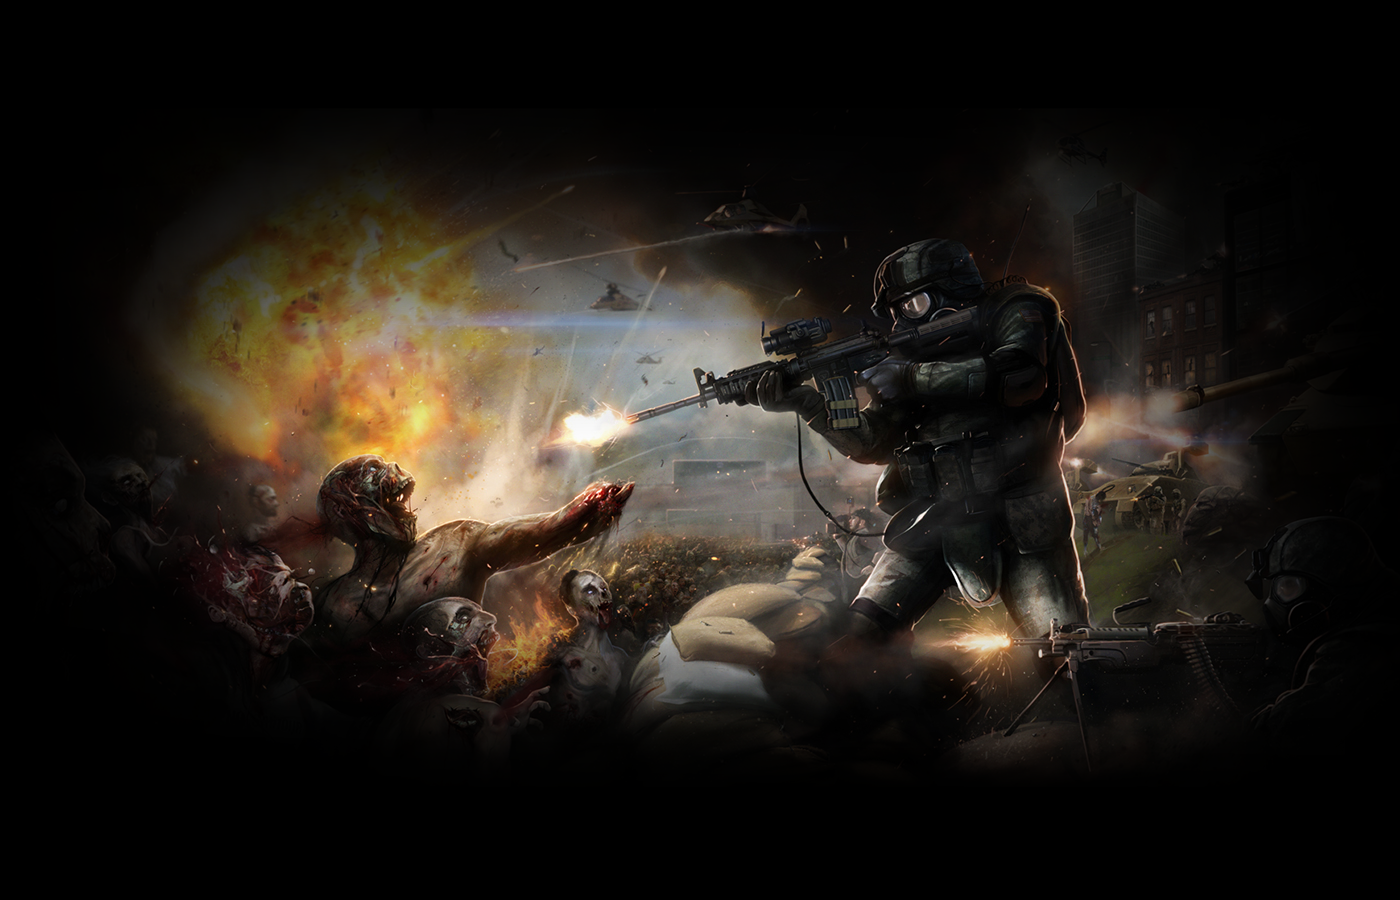 We Have Awesome Zombie Wallpaper Here For You Today Enjoy